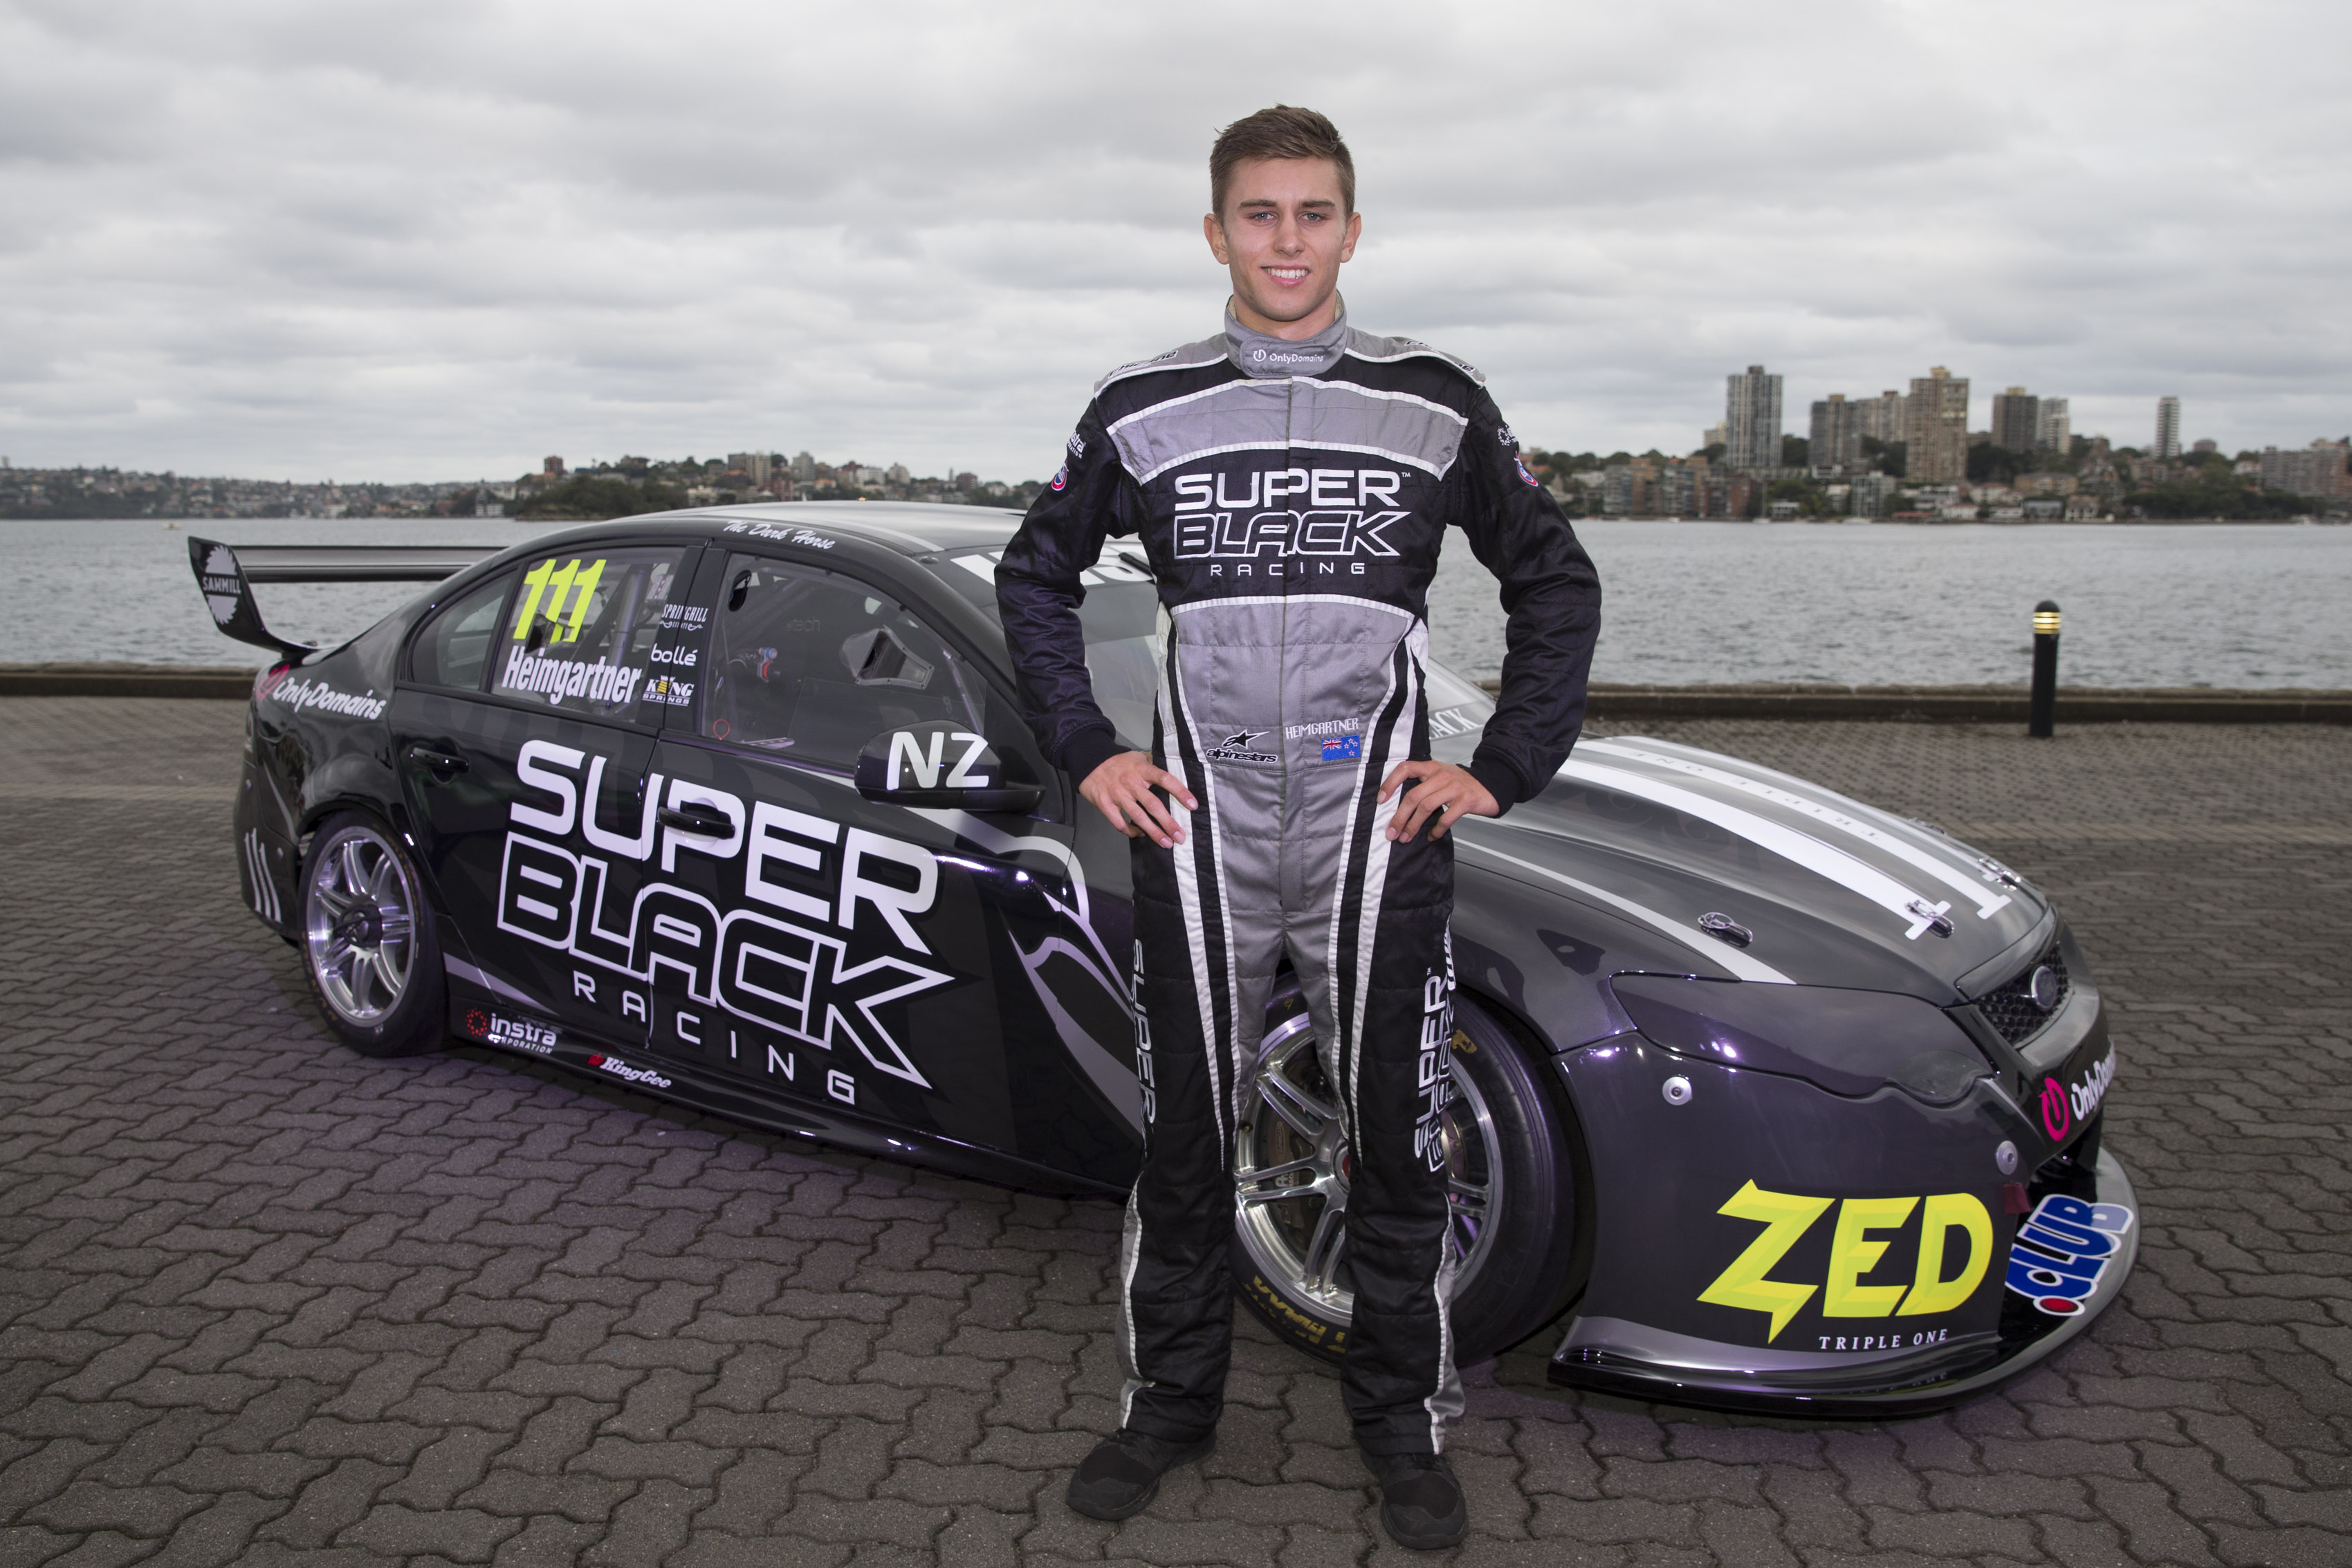 Super Black Racing launches at Sydney navel base